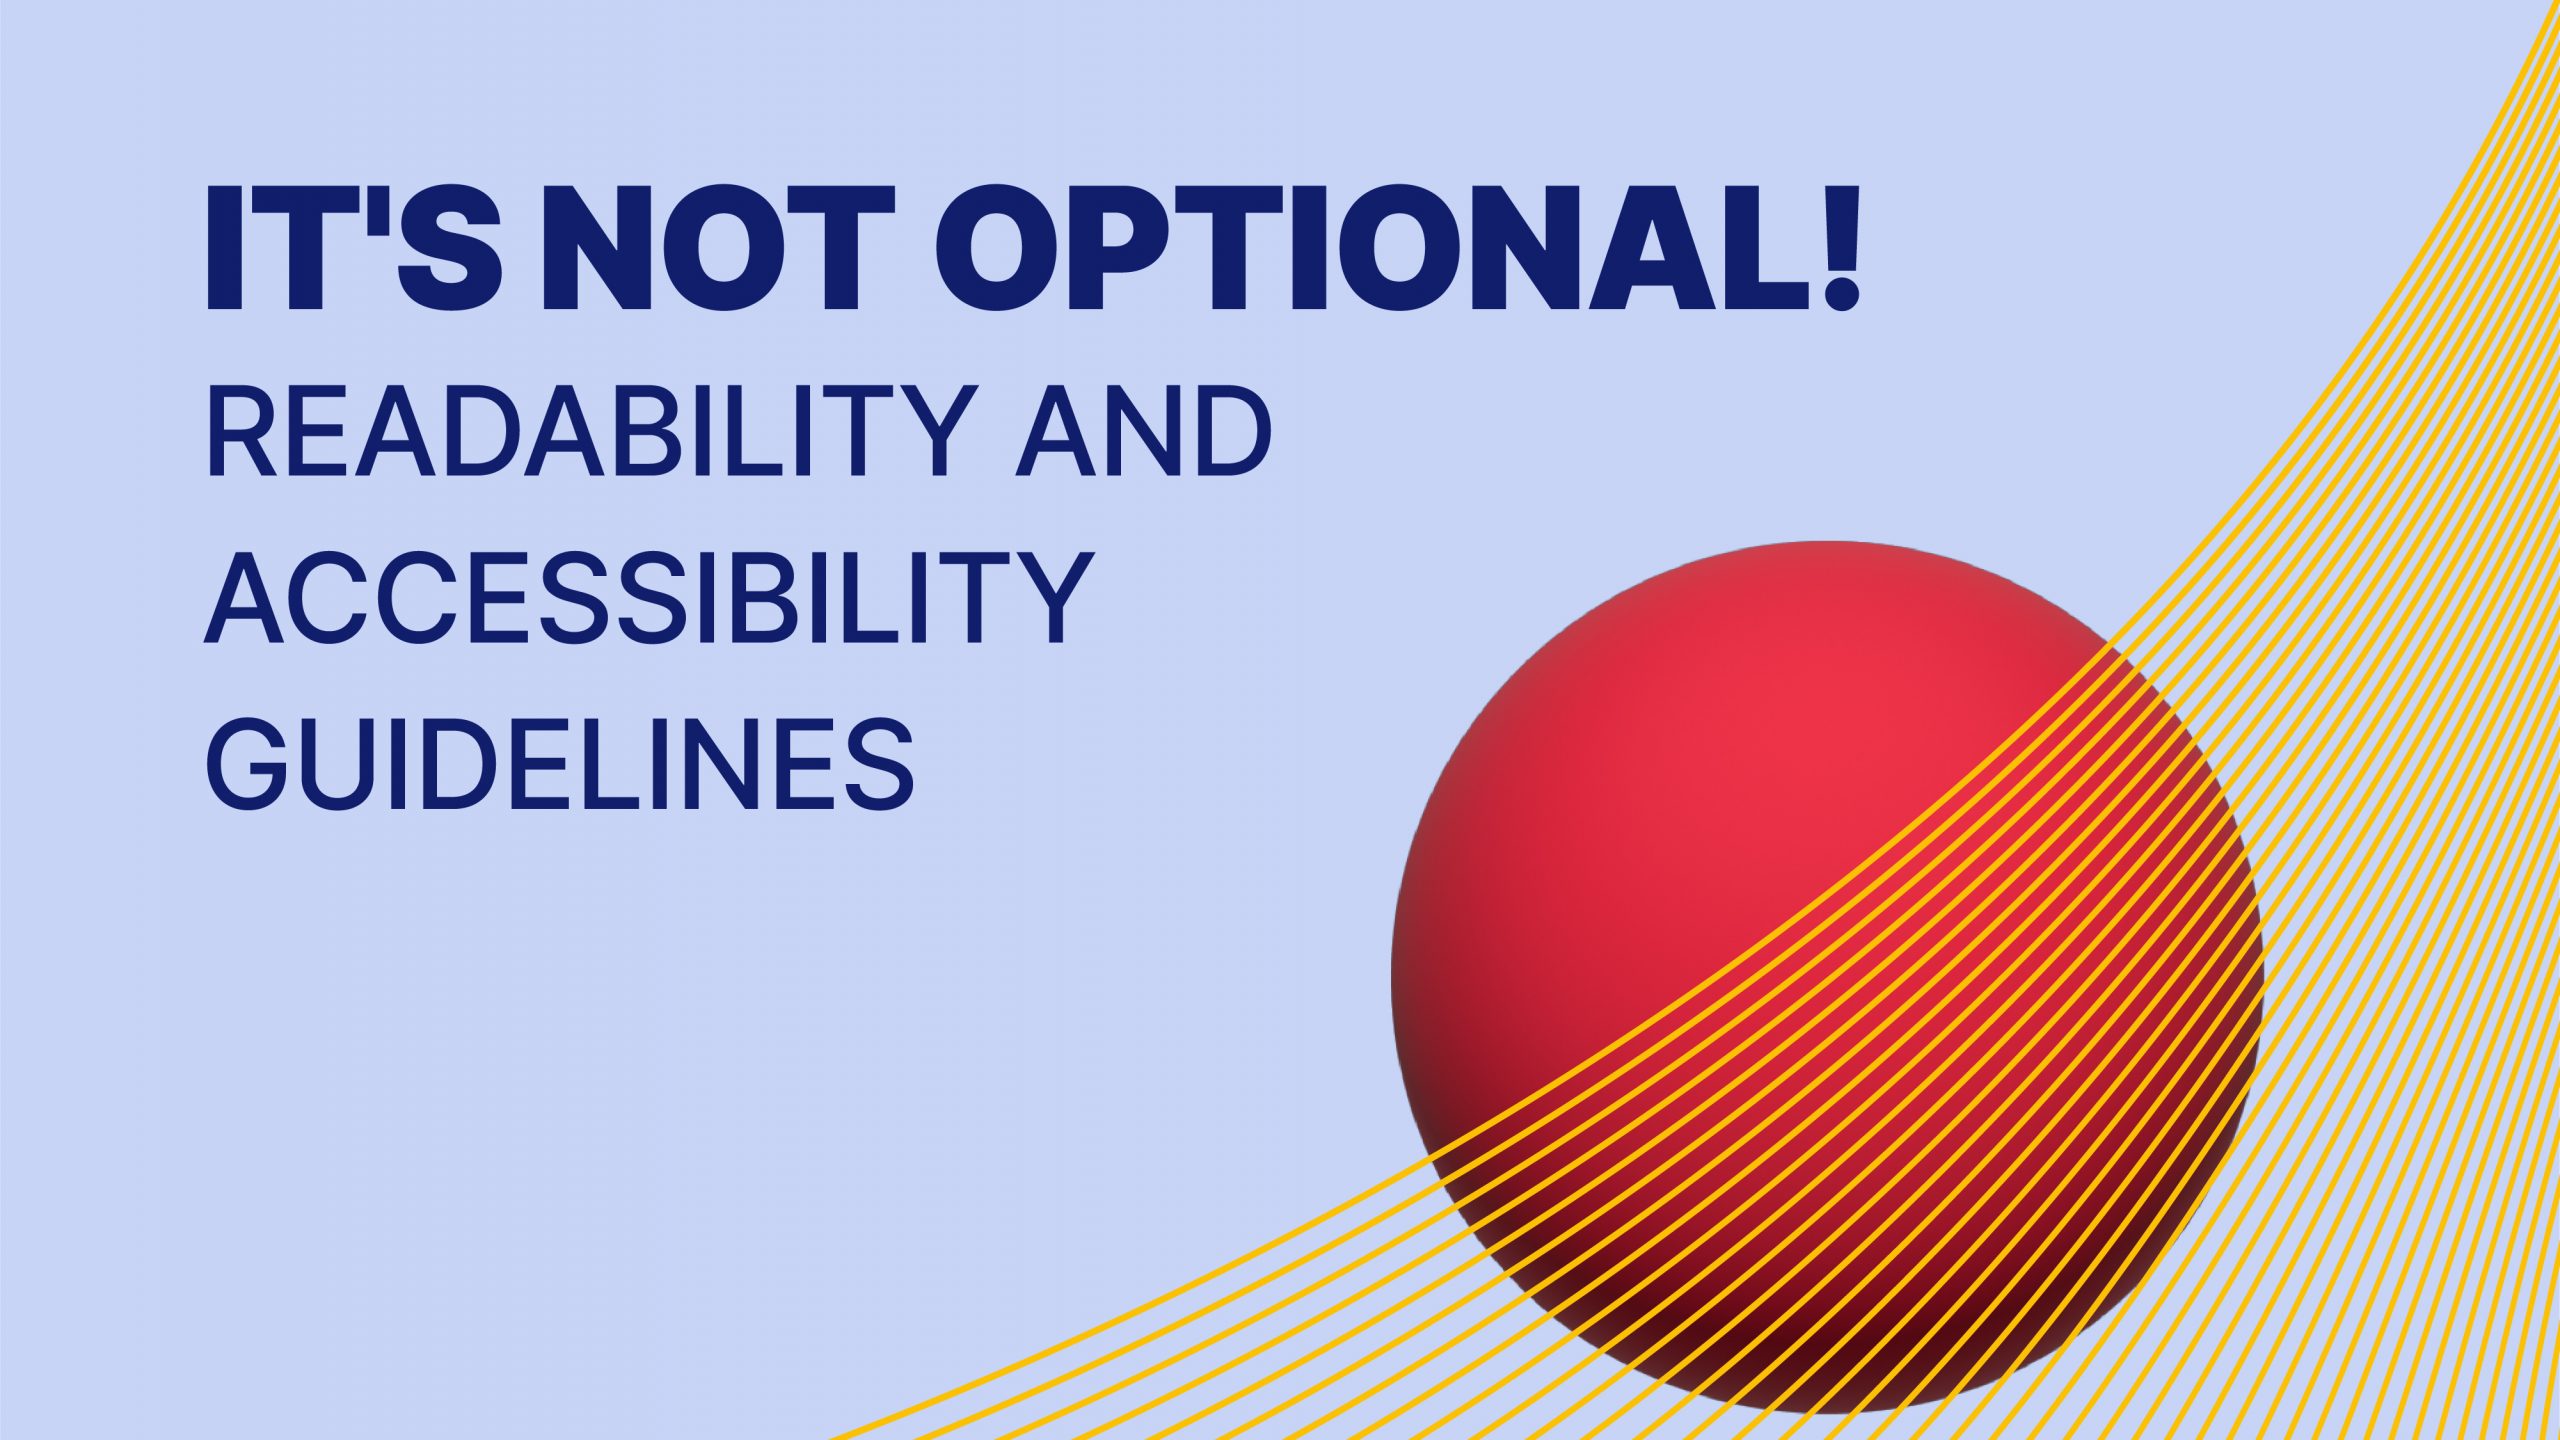 Making readability and accessibility guidelines a non-negotiable requirement